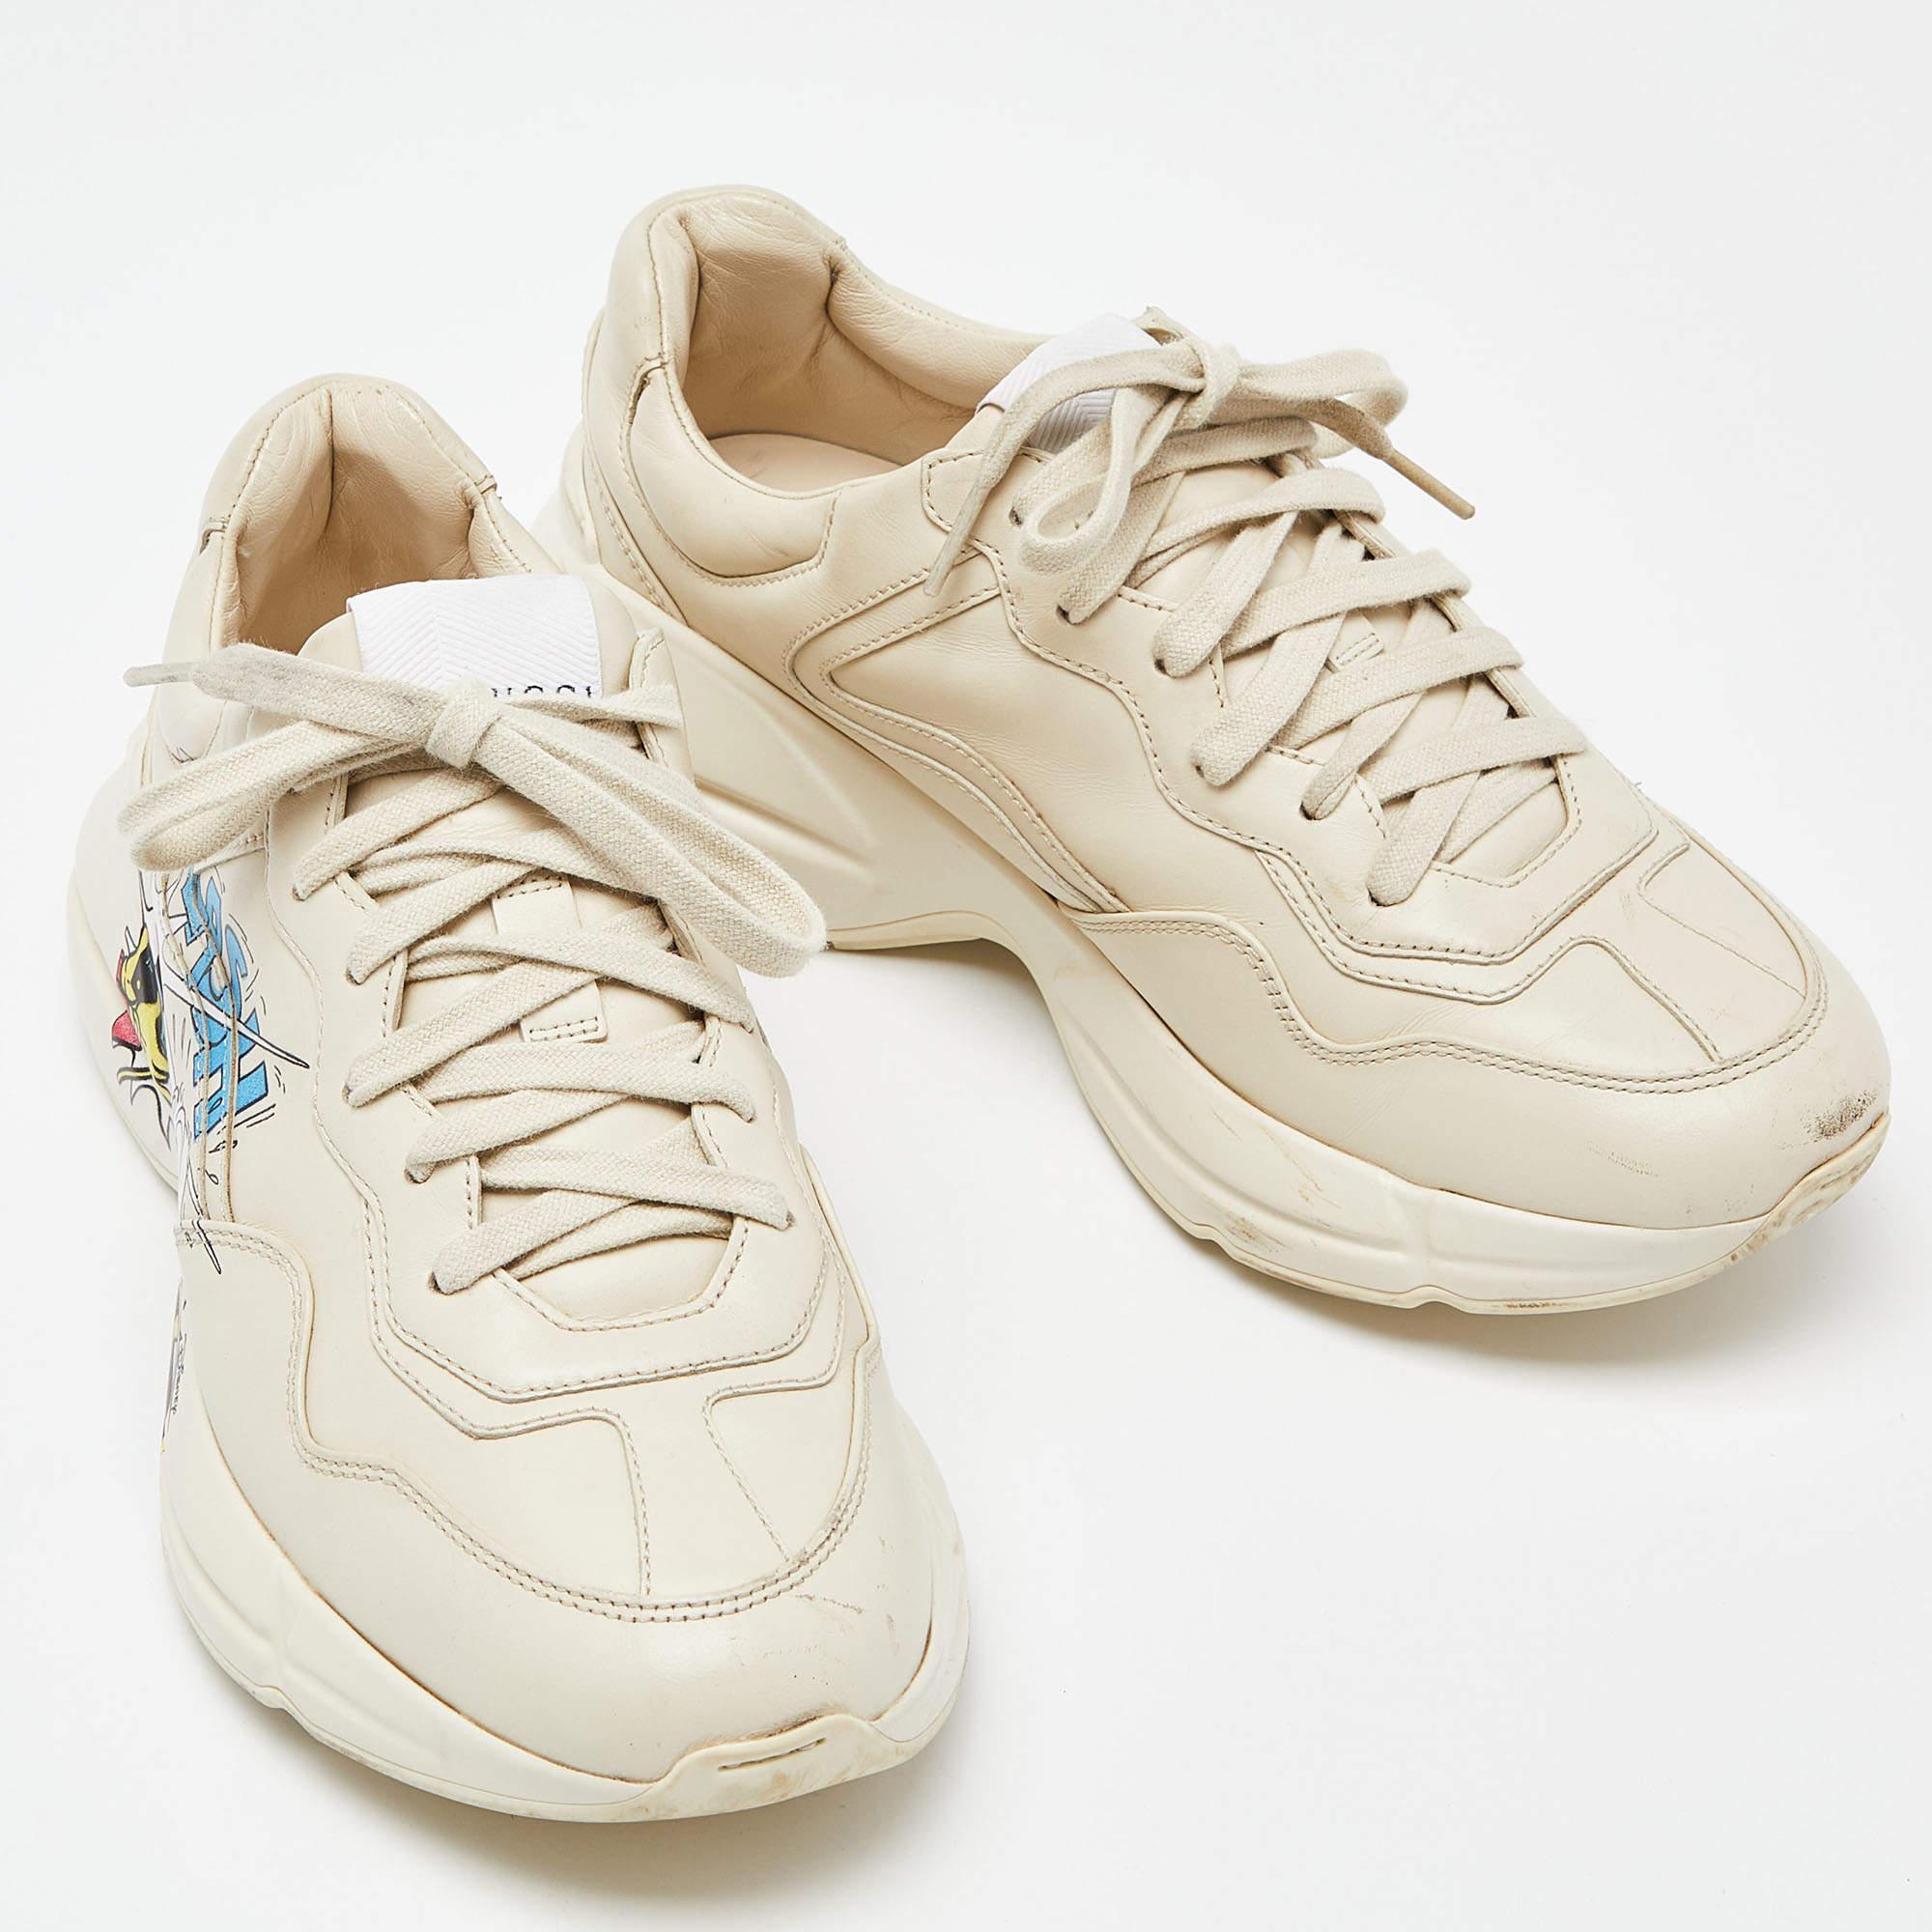 Gucci x Disney Donald Duck Cream Leather Rhyton Sneakers Size 38 2